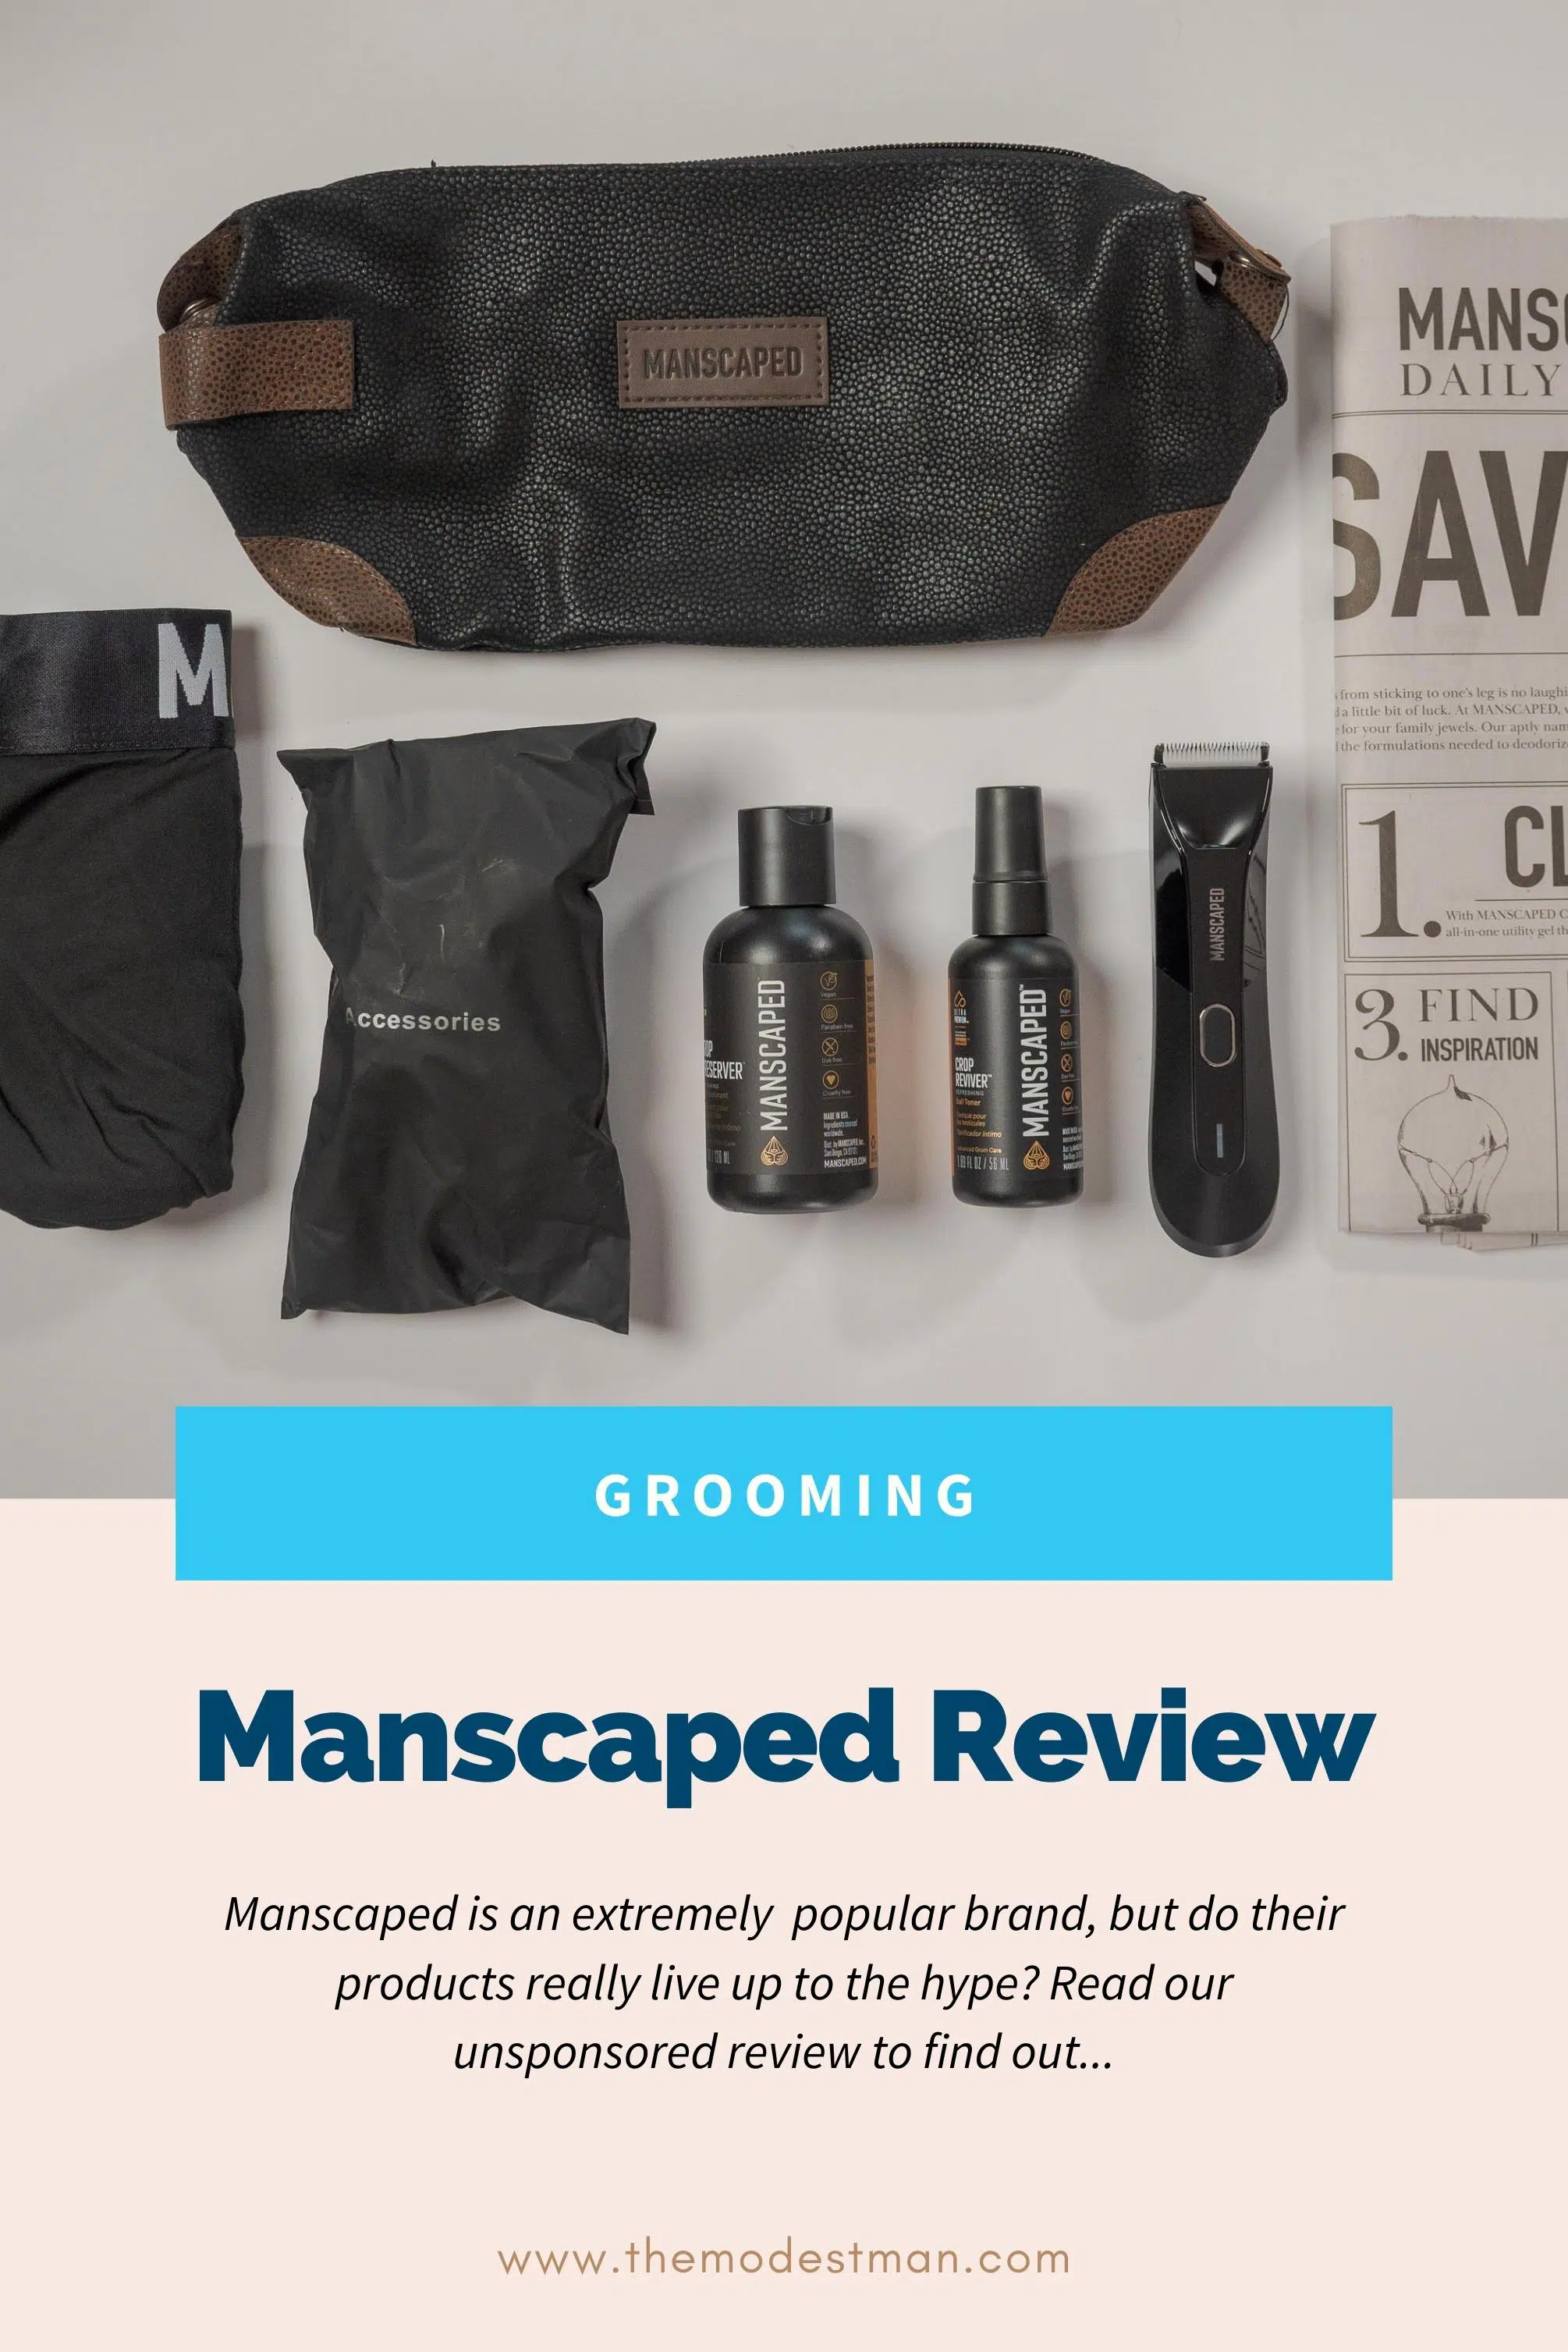 Manscaped Brand Review